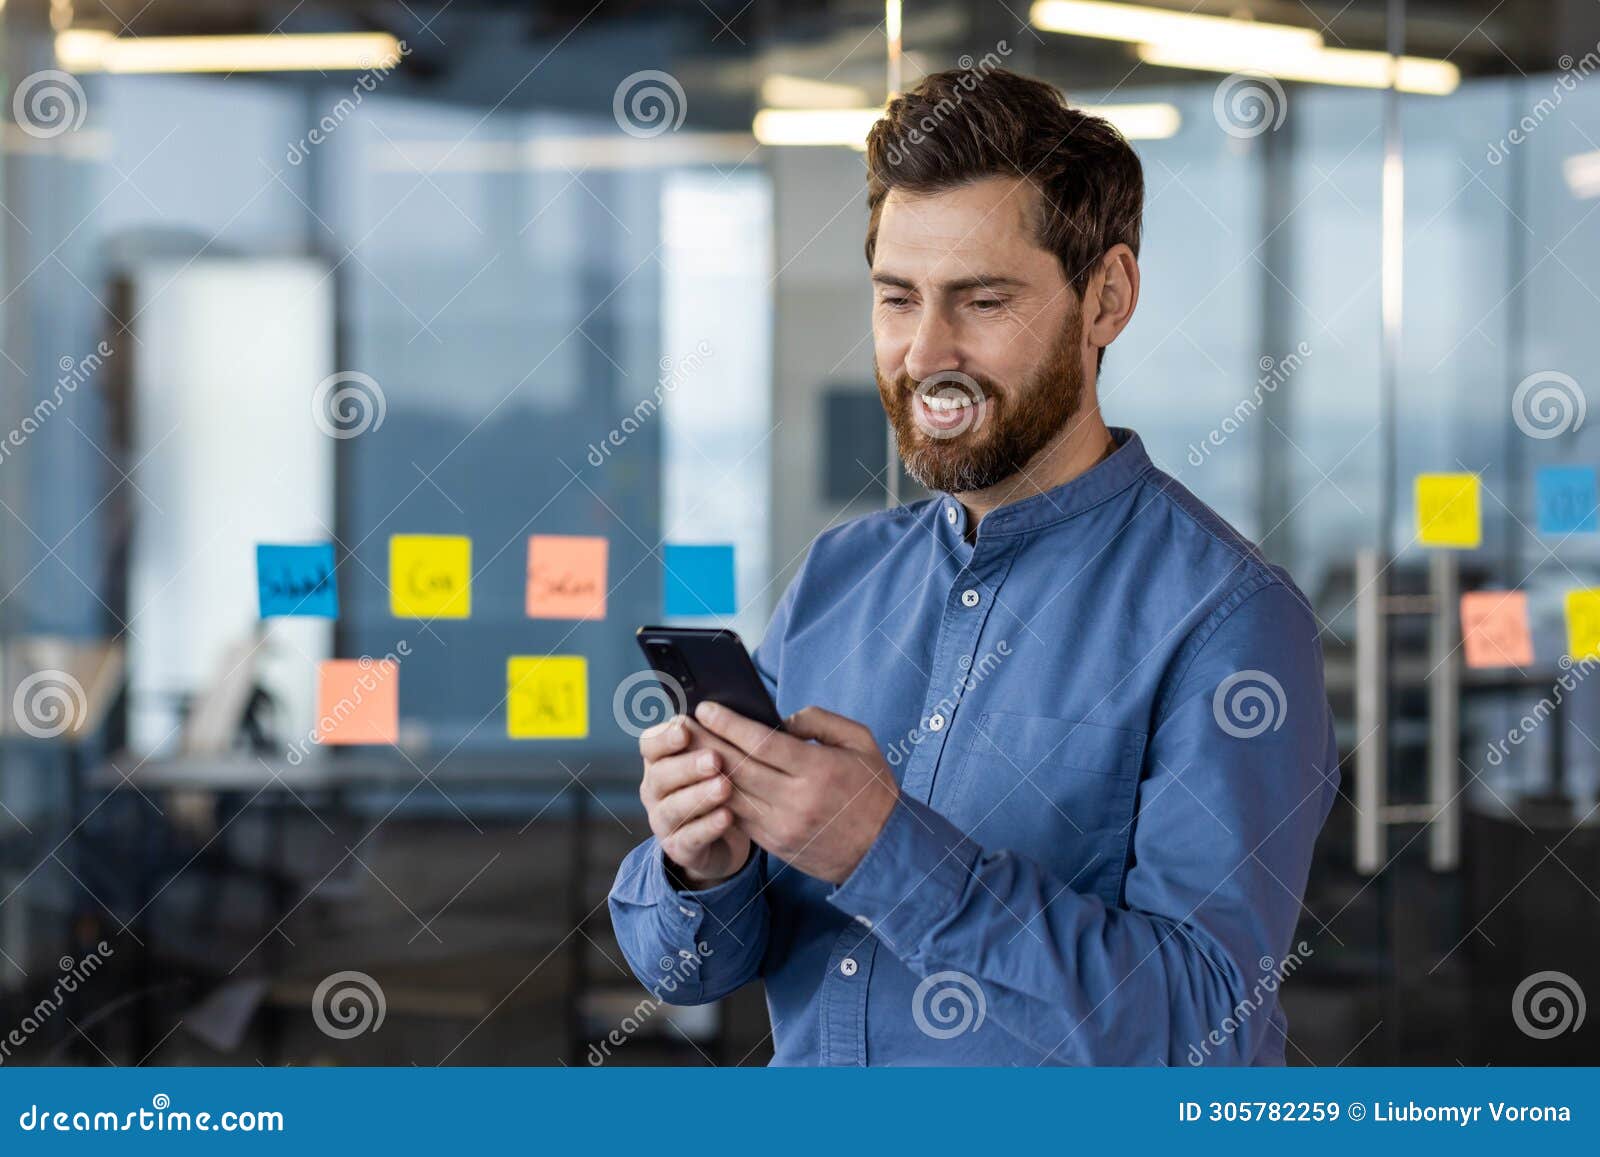 a young man is working and standing in the office against the background of a glass board with notes and smilingly using